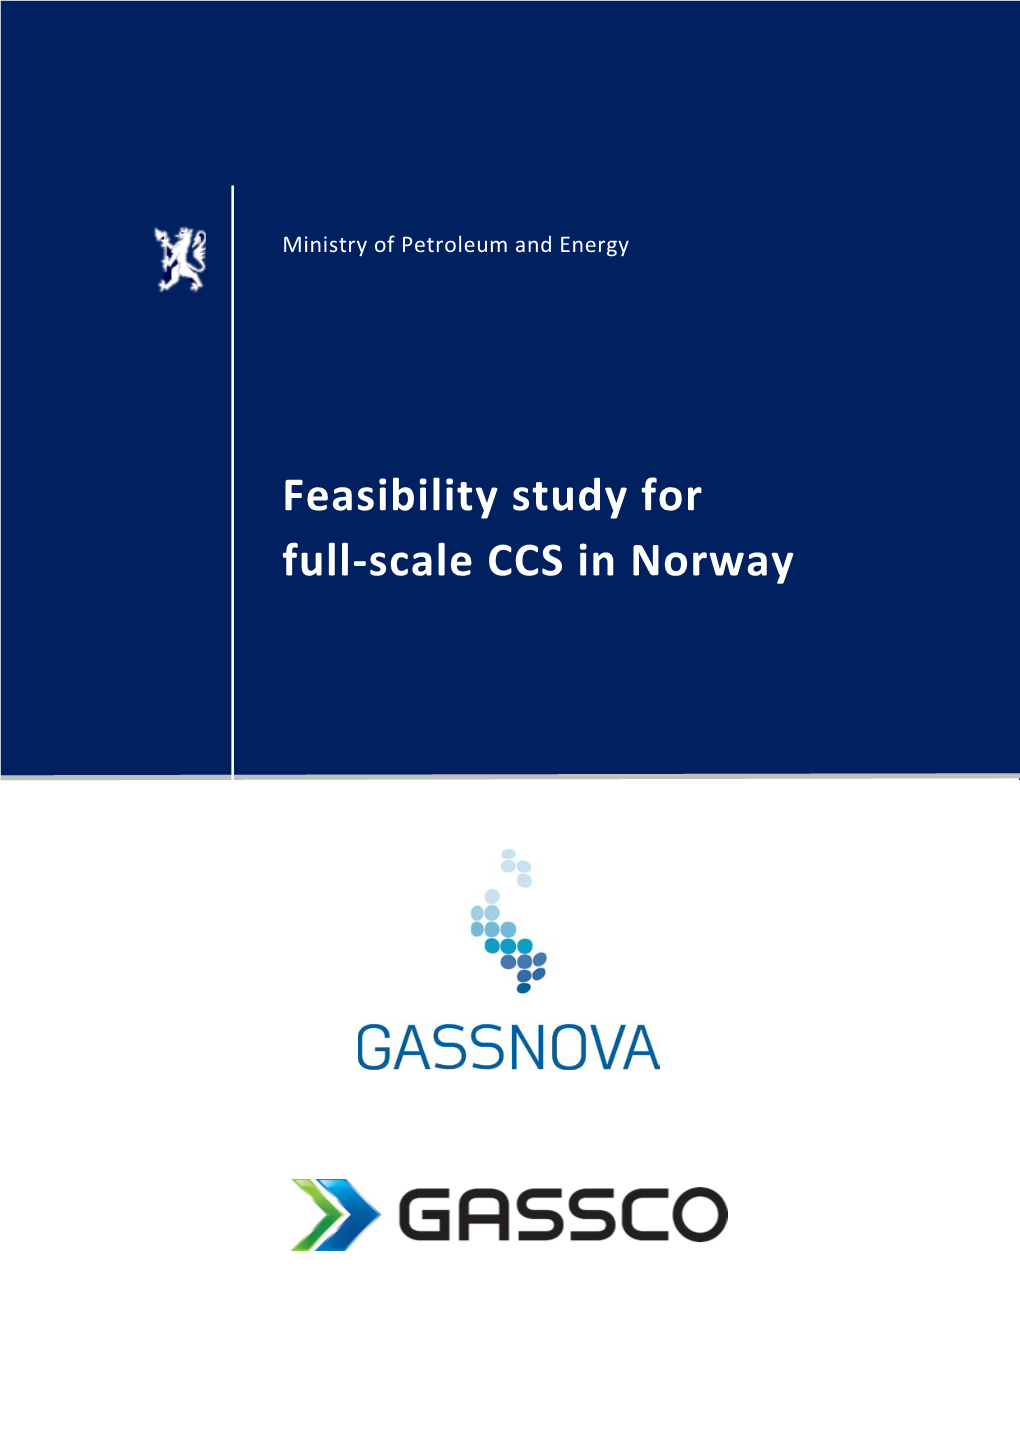 Feasibility Study for Full-Scale CCS in Norway